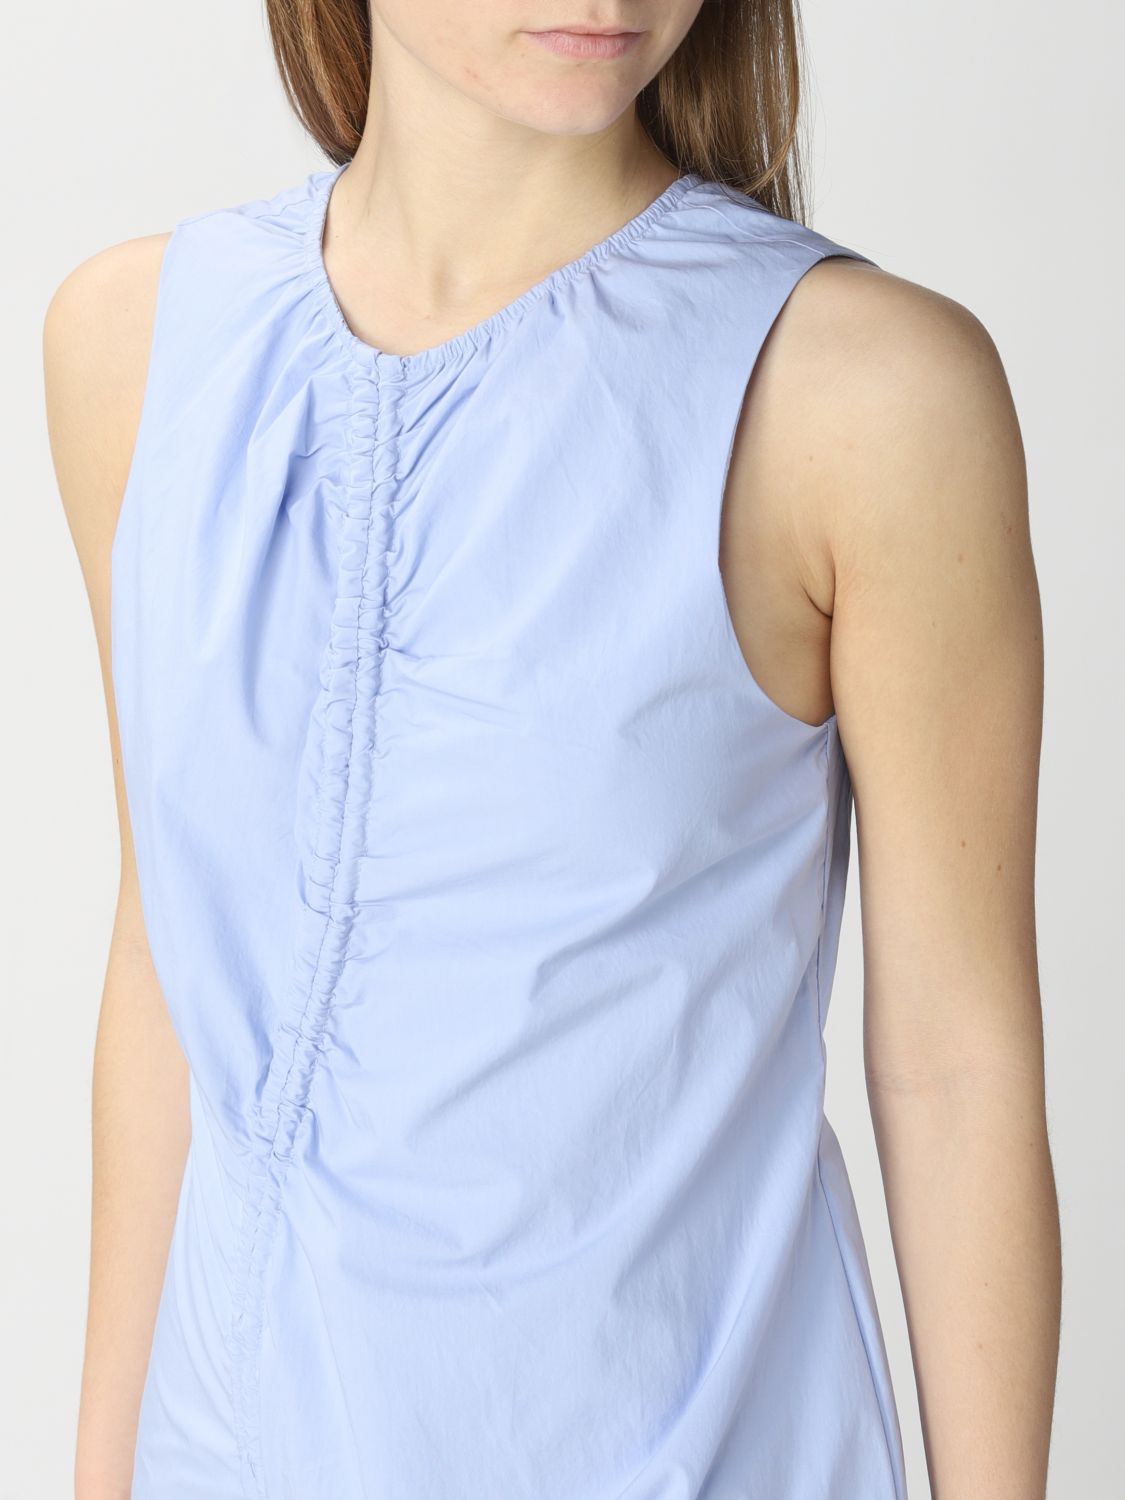 Sir The Label Outlet: dress for woman - Gnawed Blue | Sir The Label ...